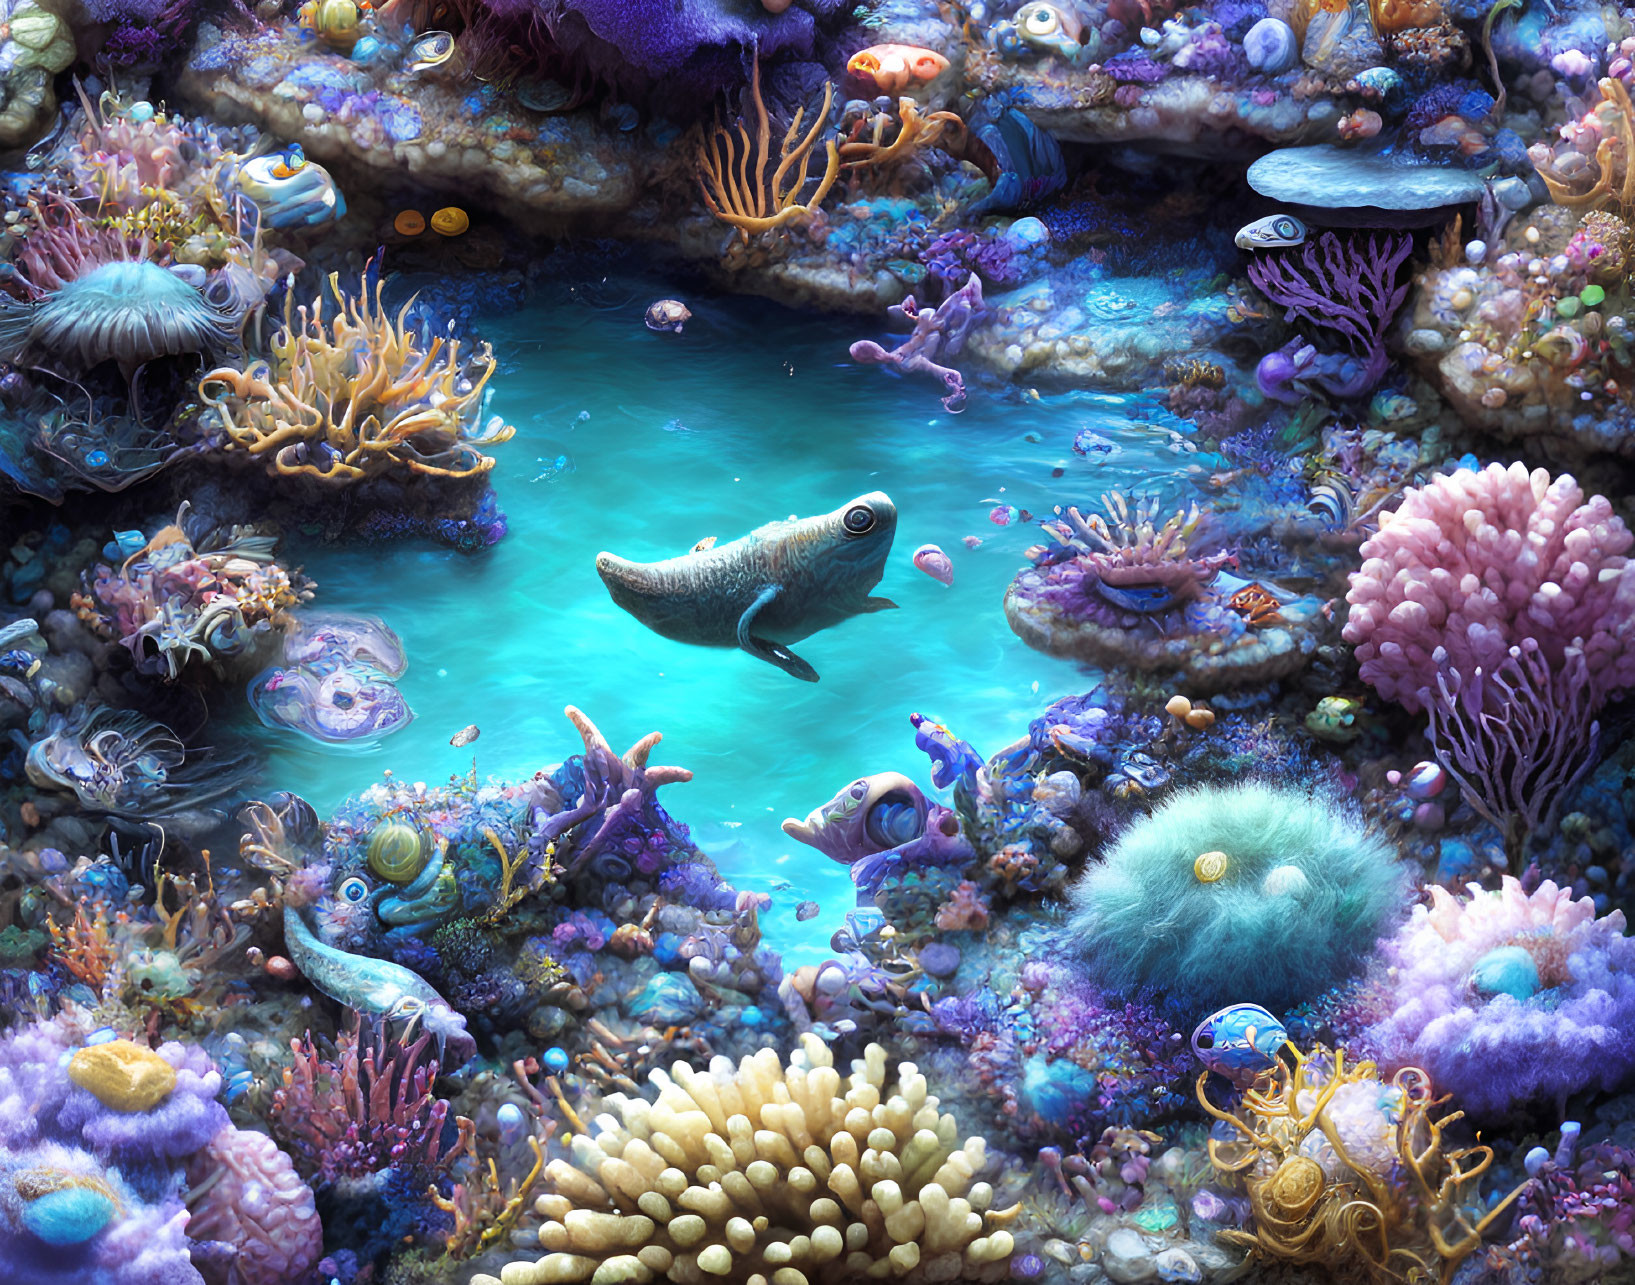 Colorful Underwater Scene with Diverse Coral and Sea Creatures